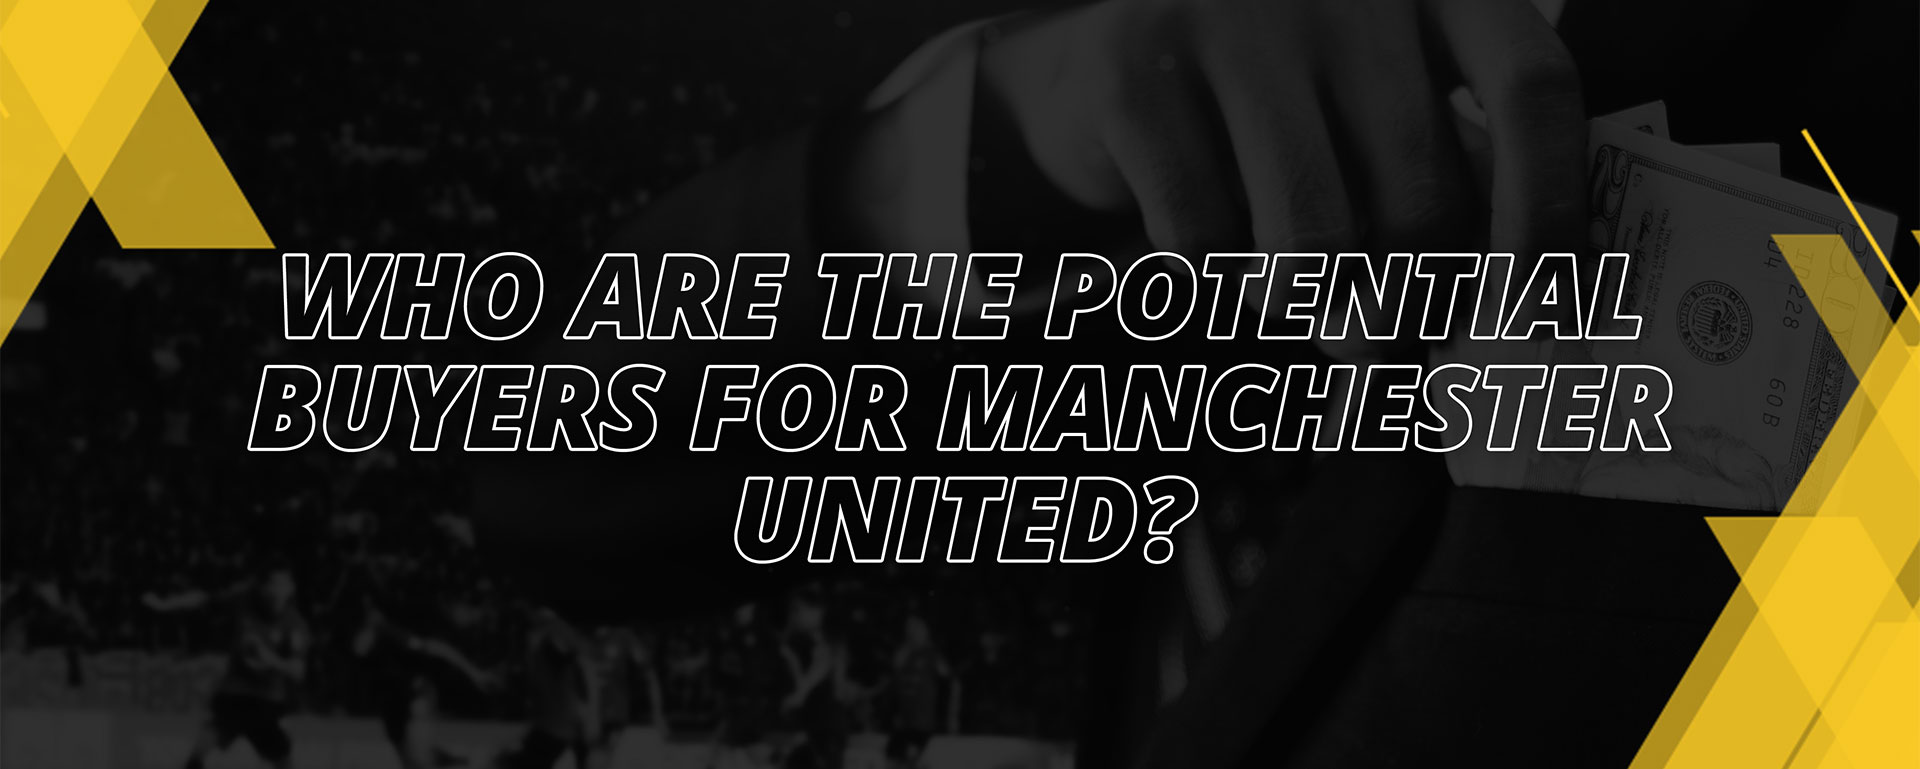 WHO ARE THE POTENTIAL BUYERS FOR MANCHESTER UNITED?